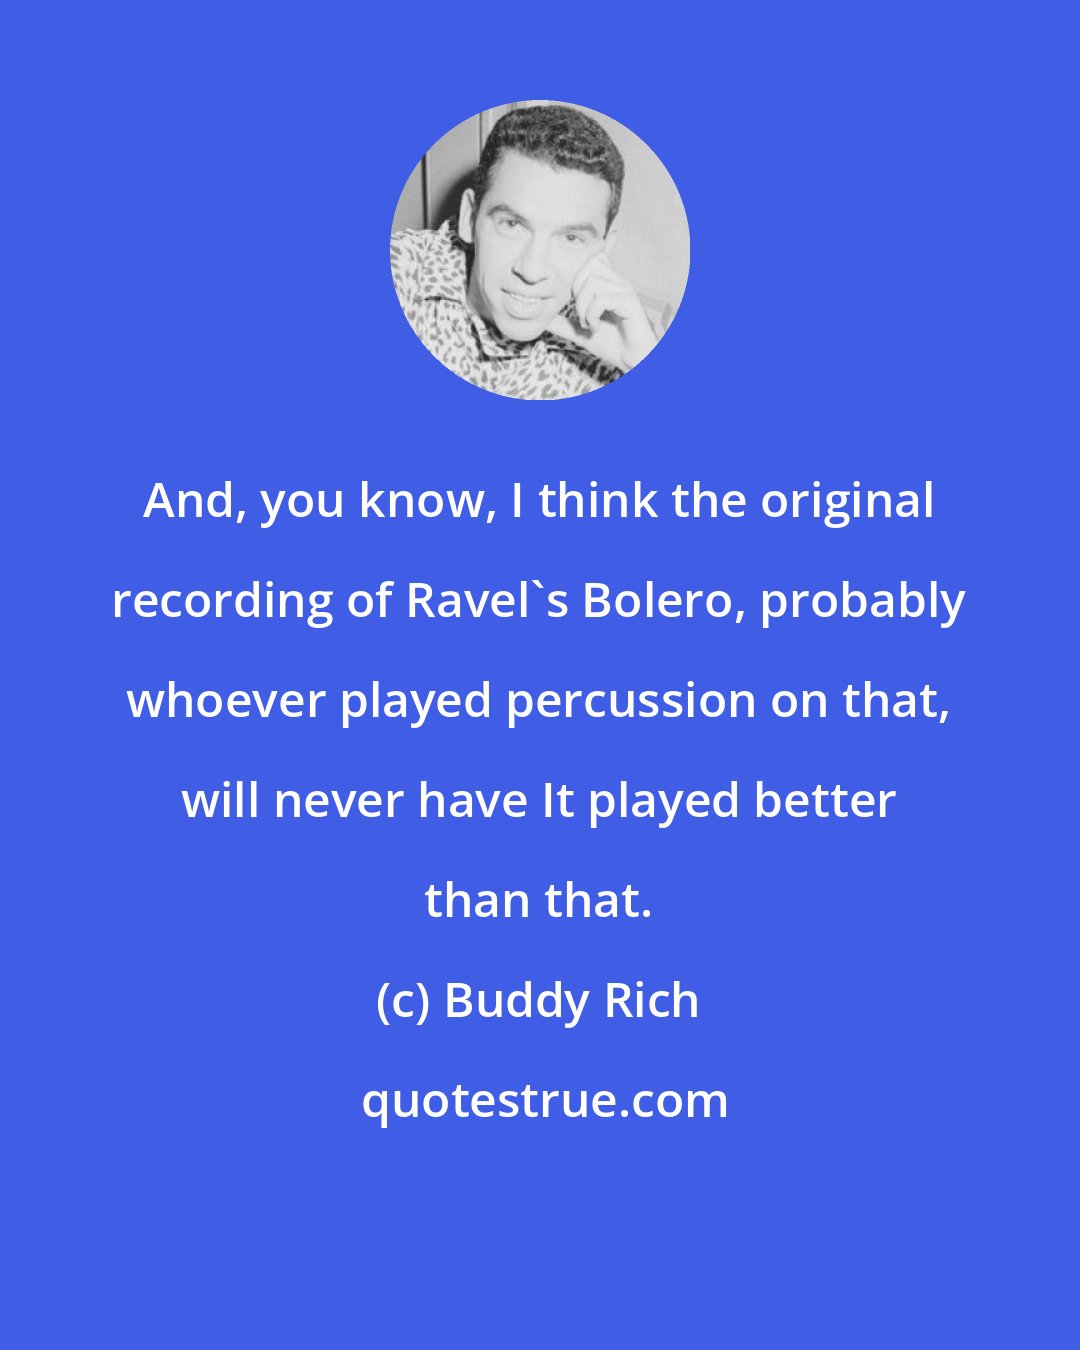 Buddy Rich: And, you know, I think the original recording of Ravel's Bolero, probably whoever played percussion on that, will never have It played better than that.